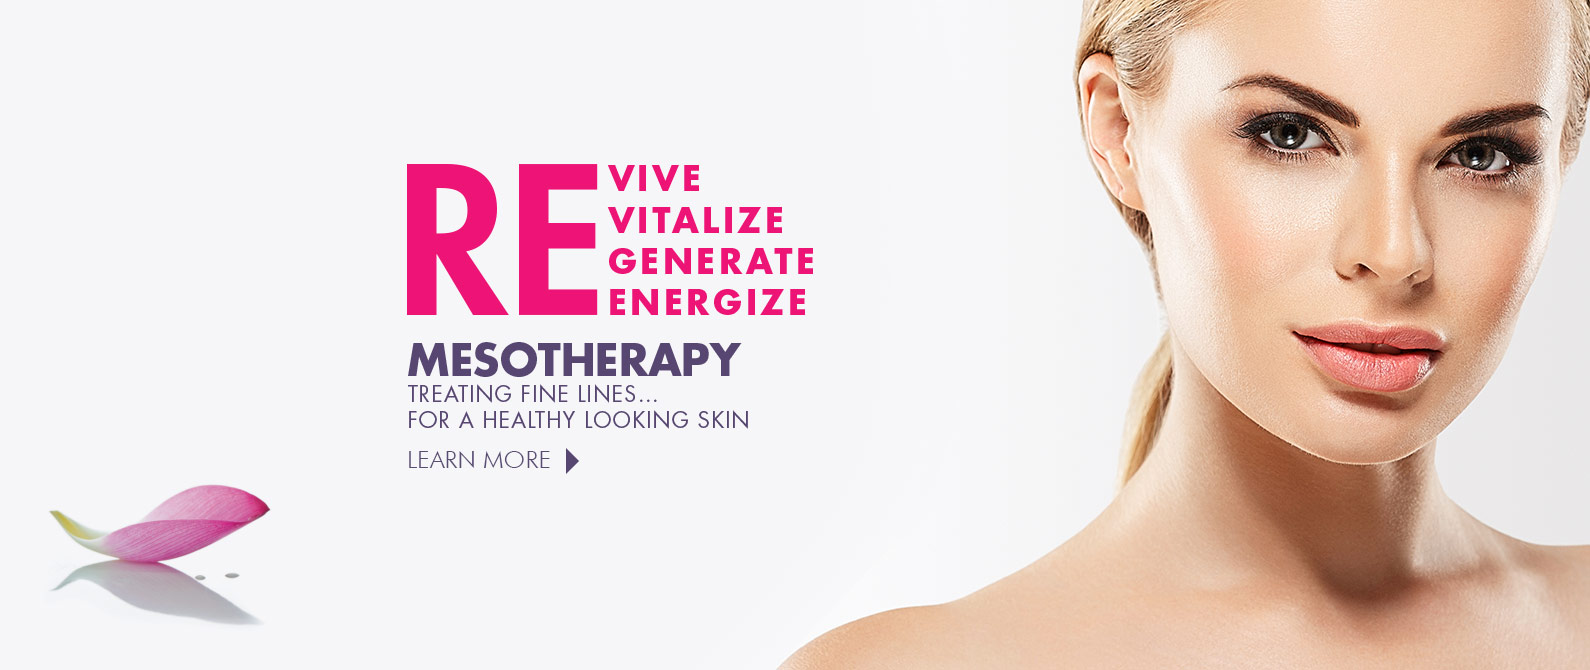 mesotherapy banner